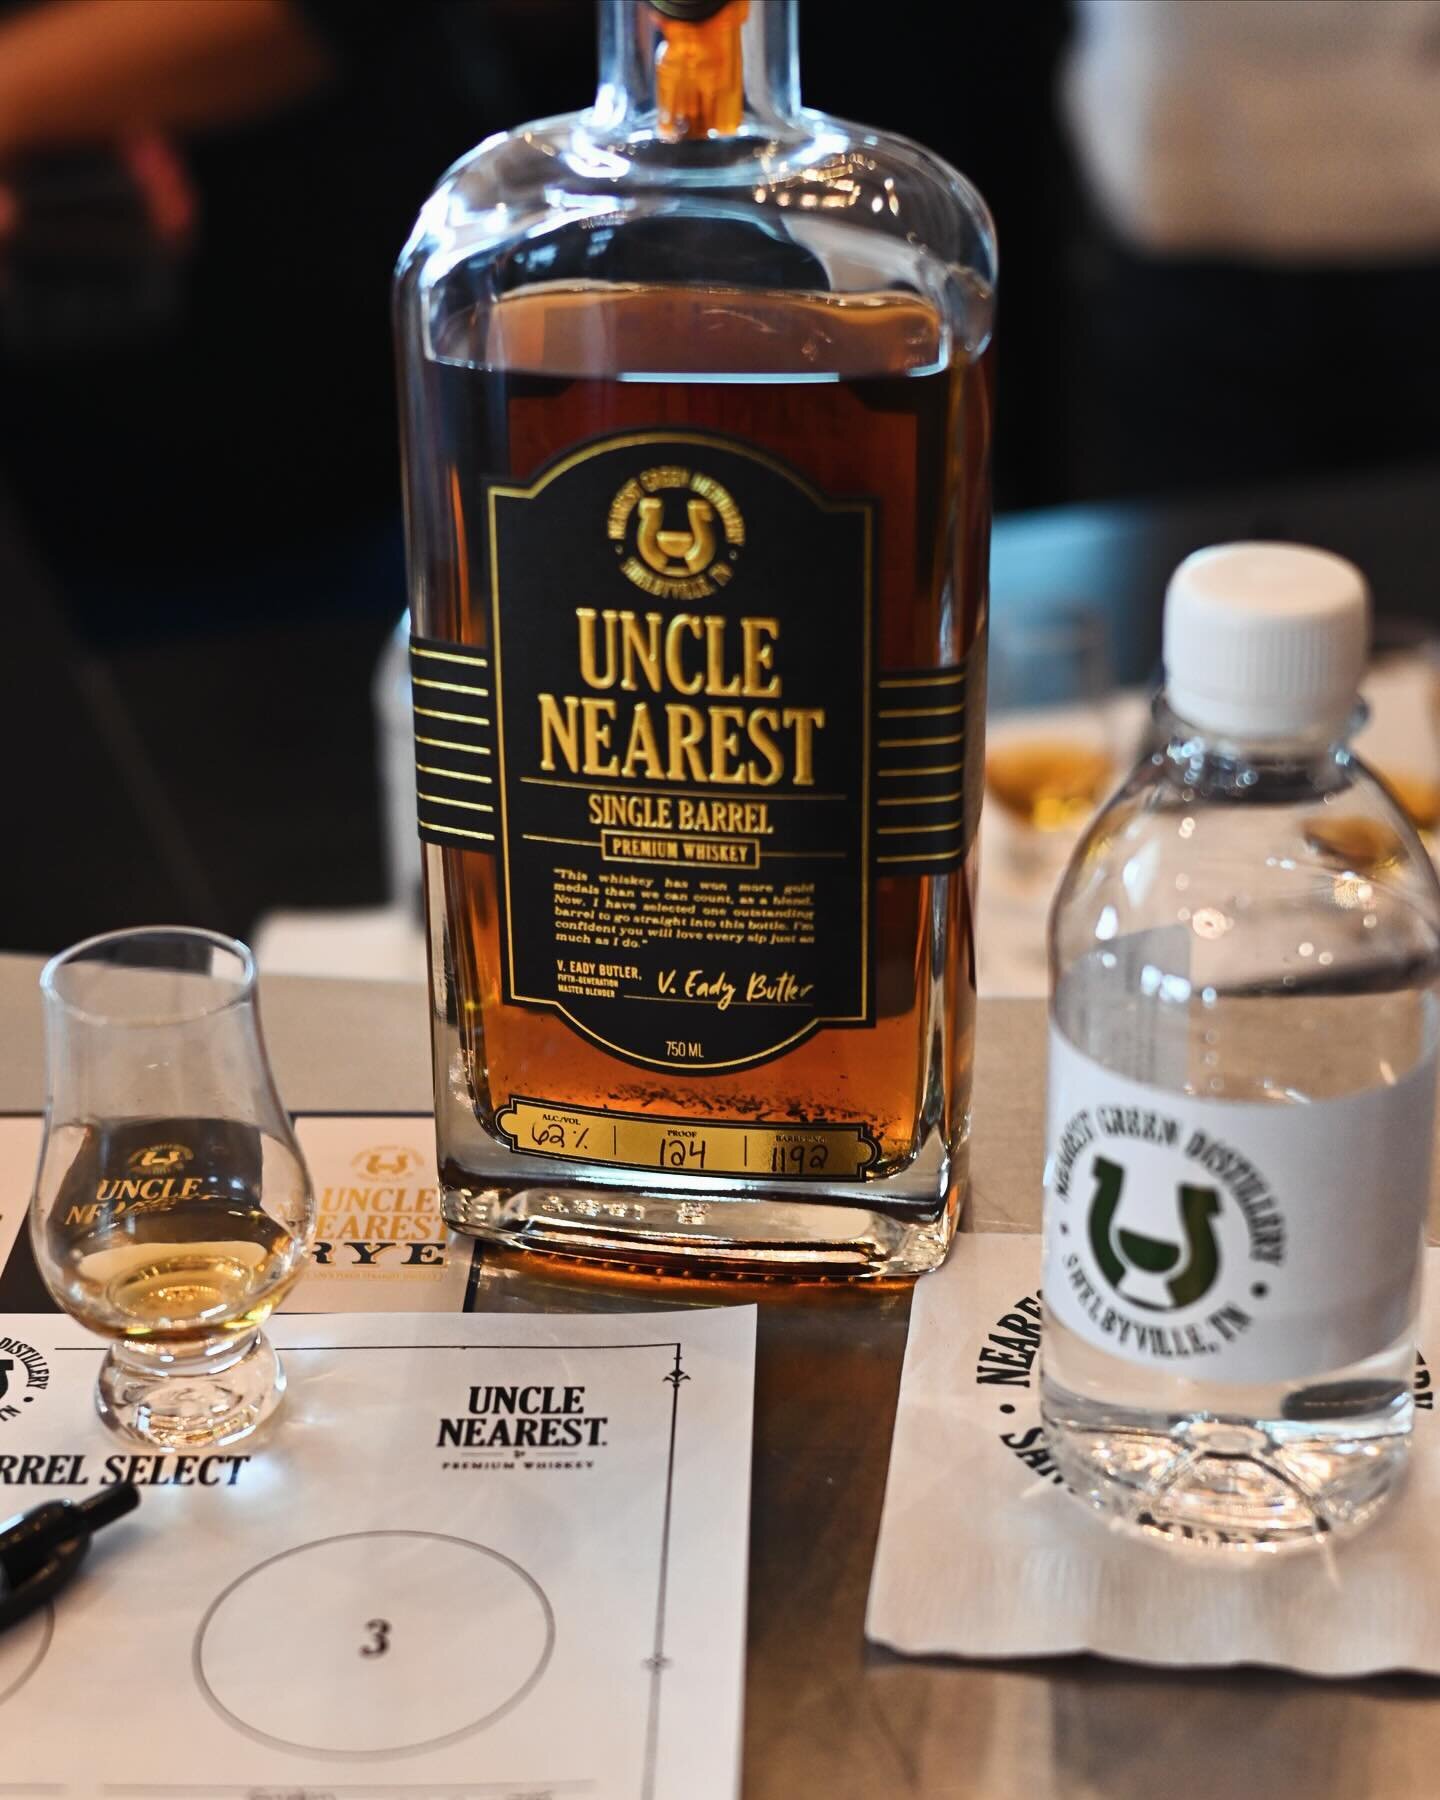 We are so thrilled to announce we have an Uncle Nearest Single Barrel Pick that is exclusive to Mora Italian and our Creation Hospitality family. It&rsquo;s an absolute must try next time you stop in!